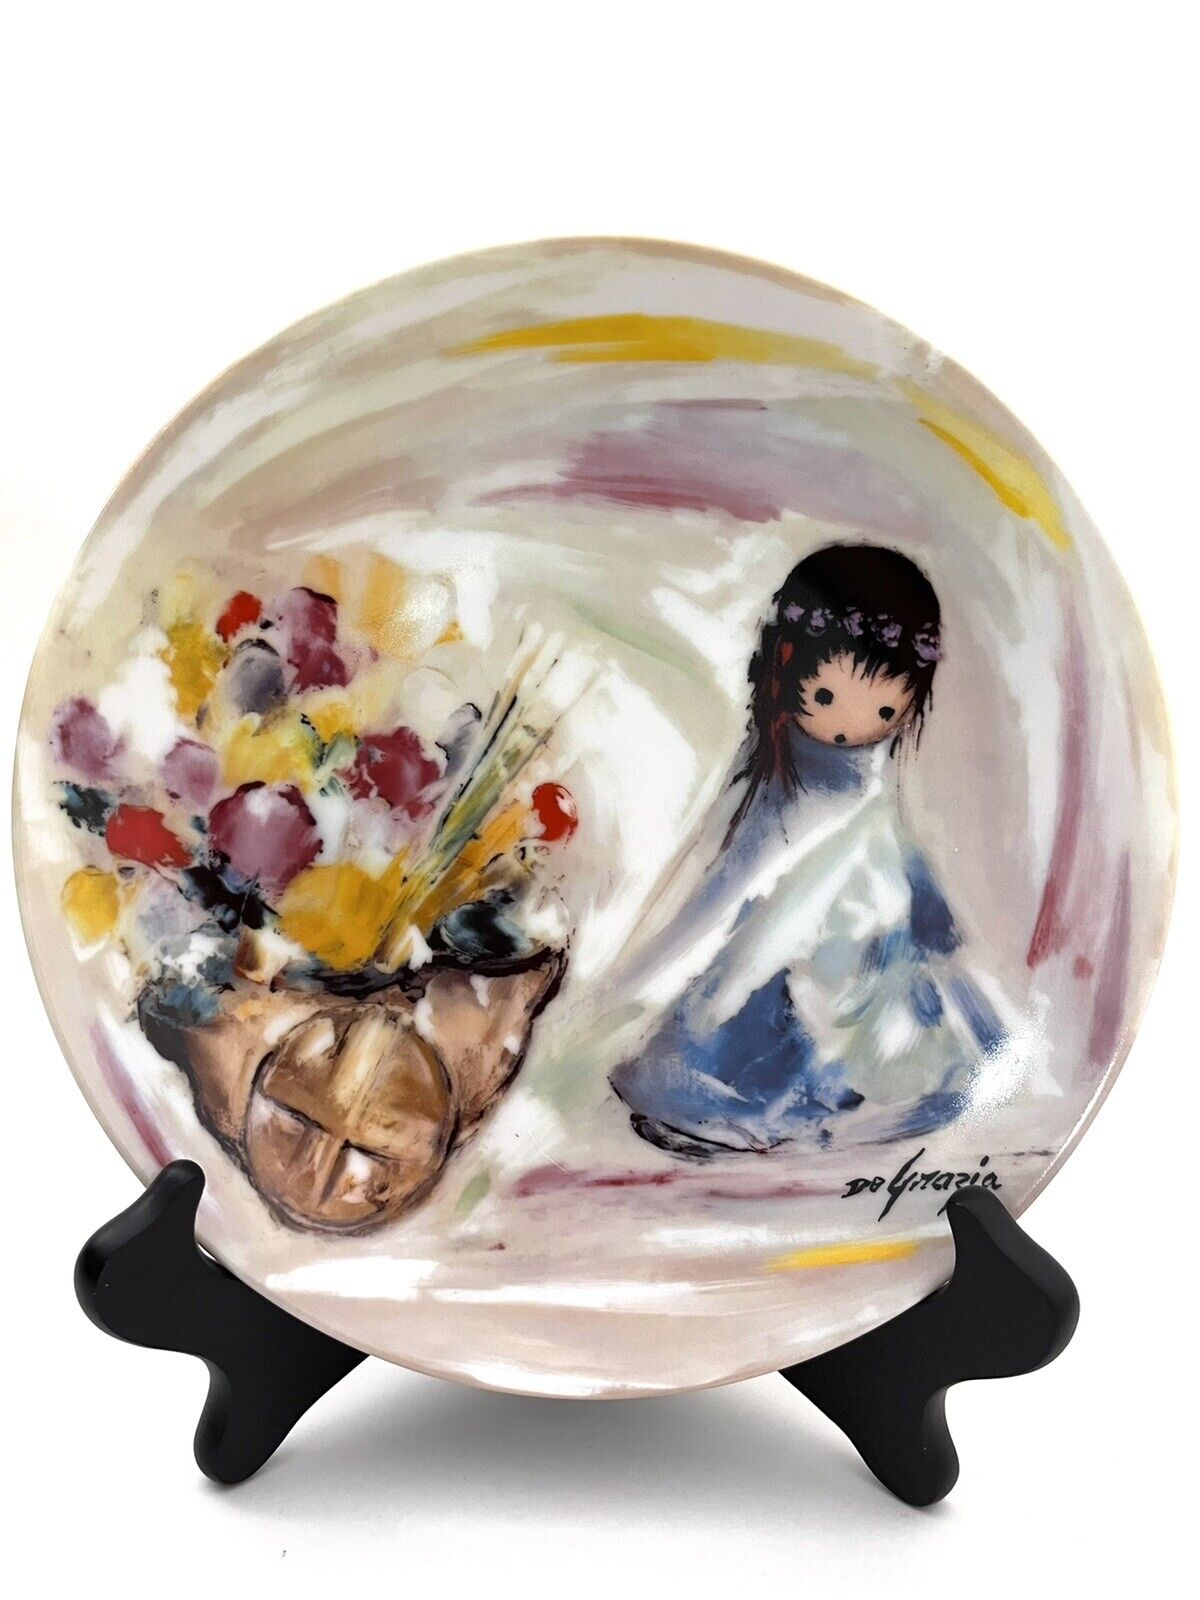 GIFTS FROM THE SUN - 1988 Ltd Ed DeGrazia Children of the Sun Collector Plate